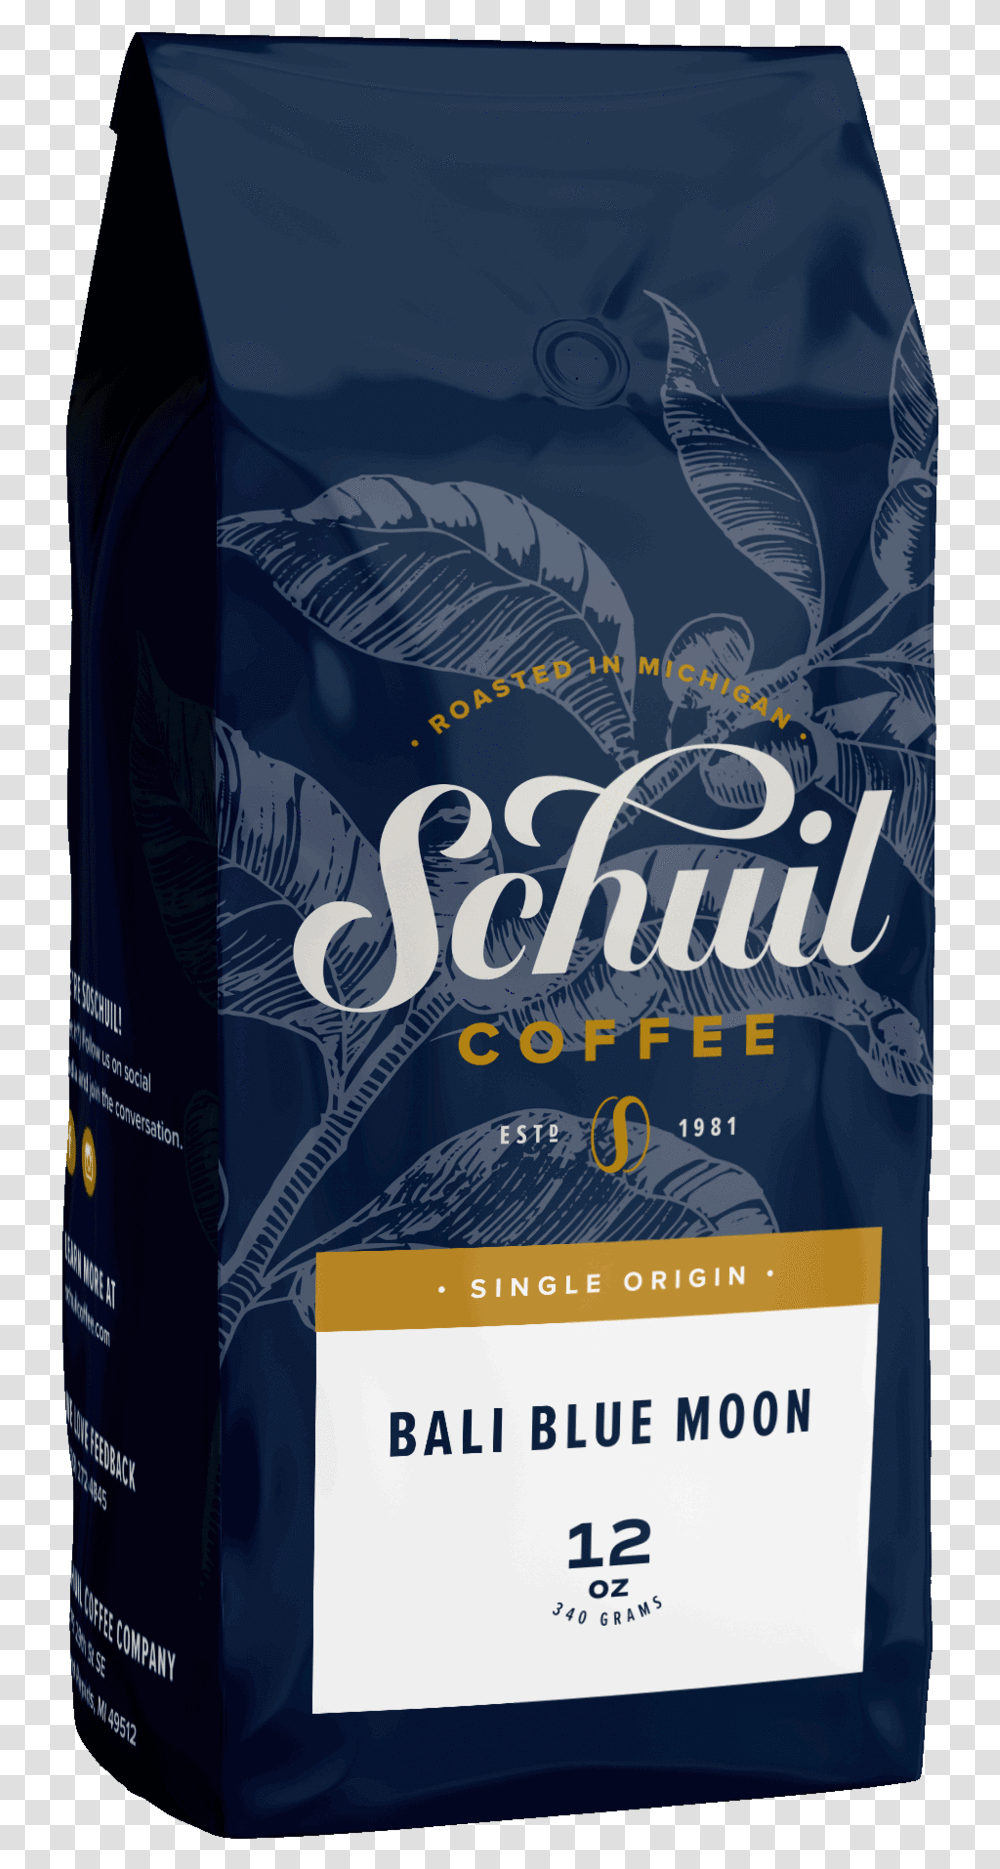 Bali Blue MoonClass Schuil Coffee Company, Poster, Advertisement, Flyer, Paper Transparent Png